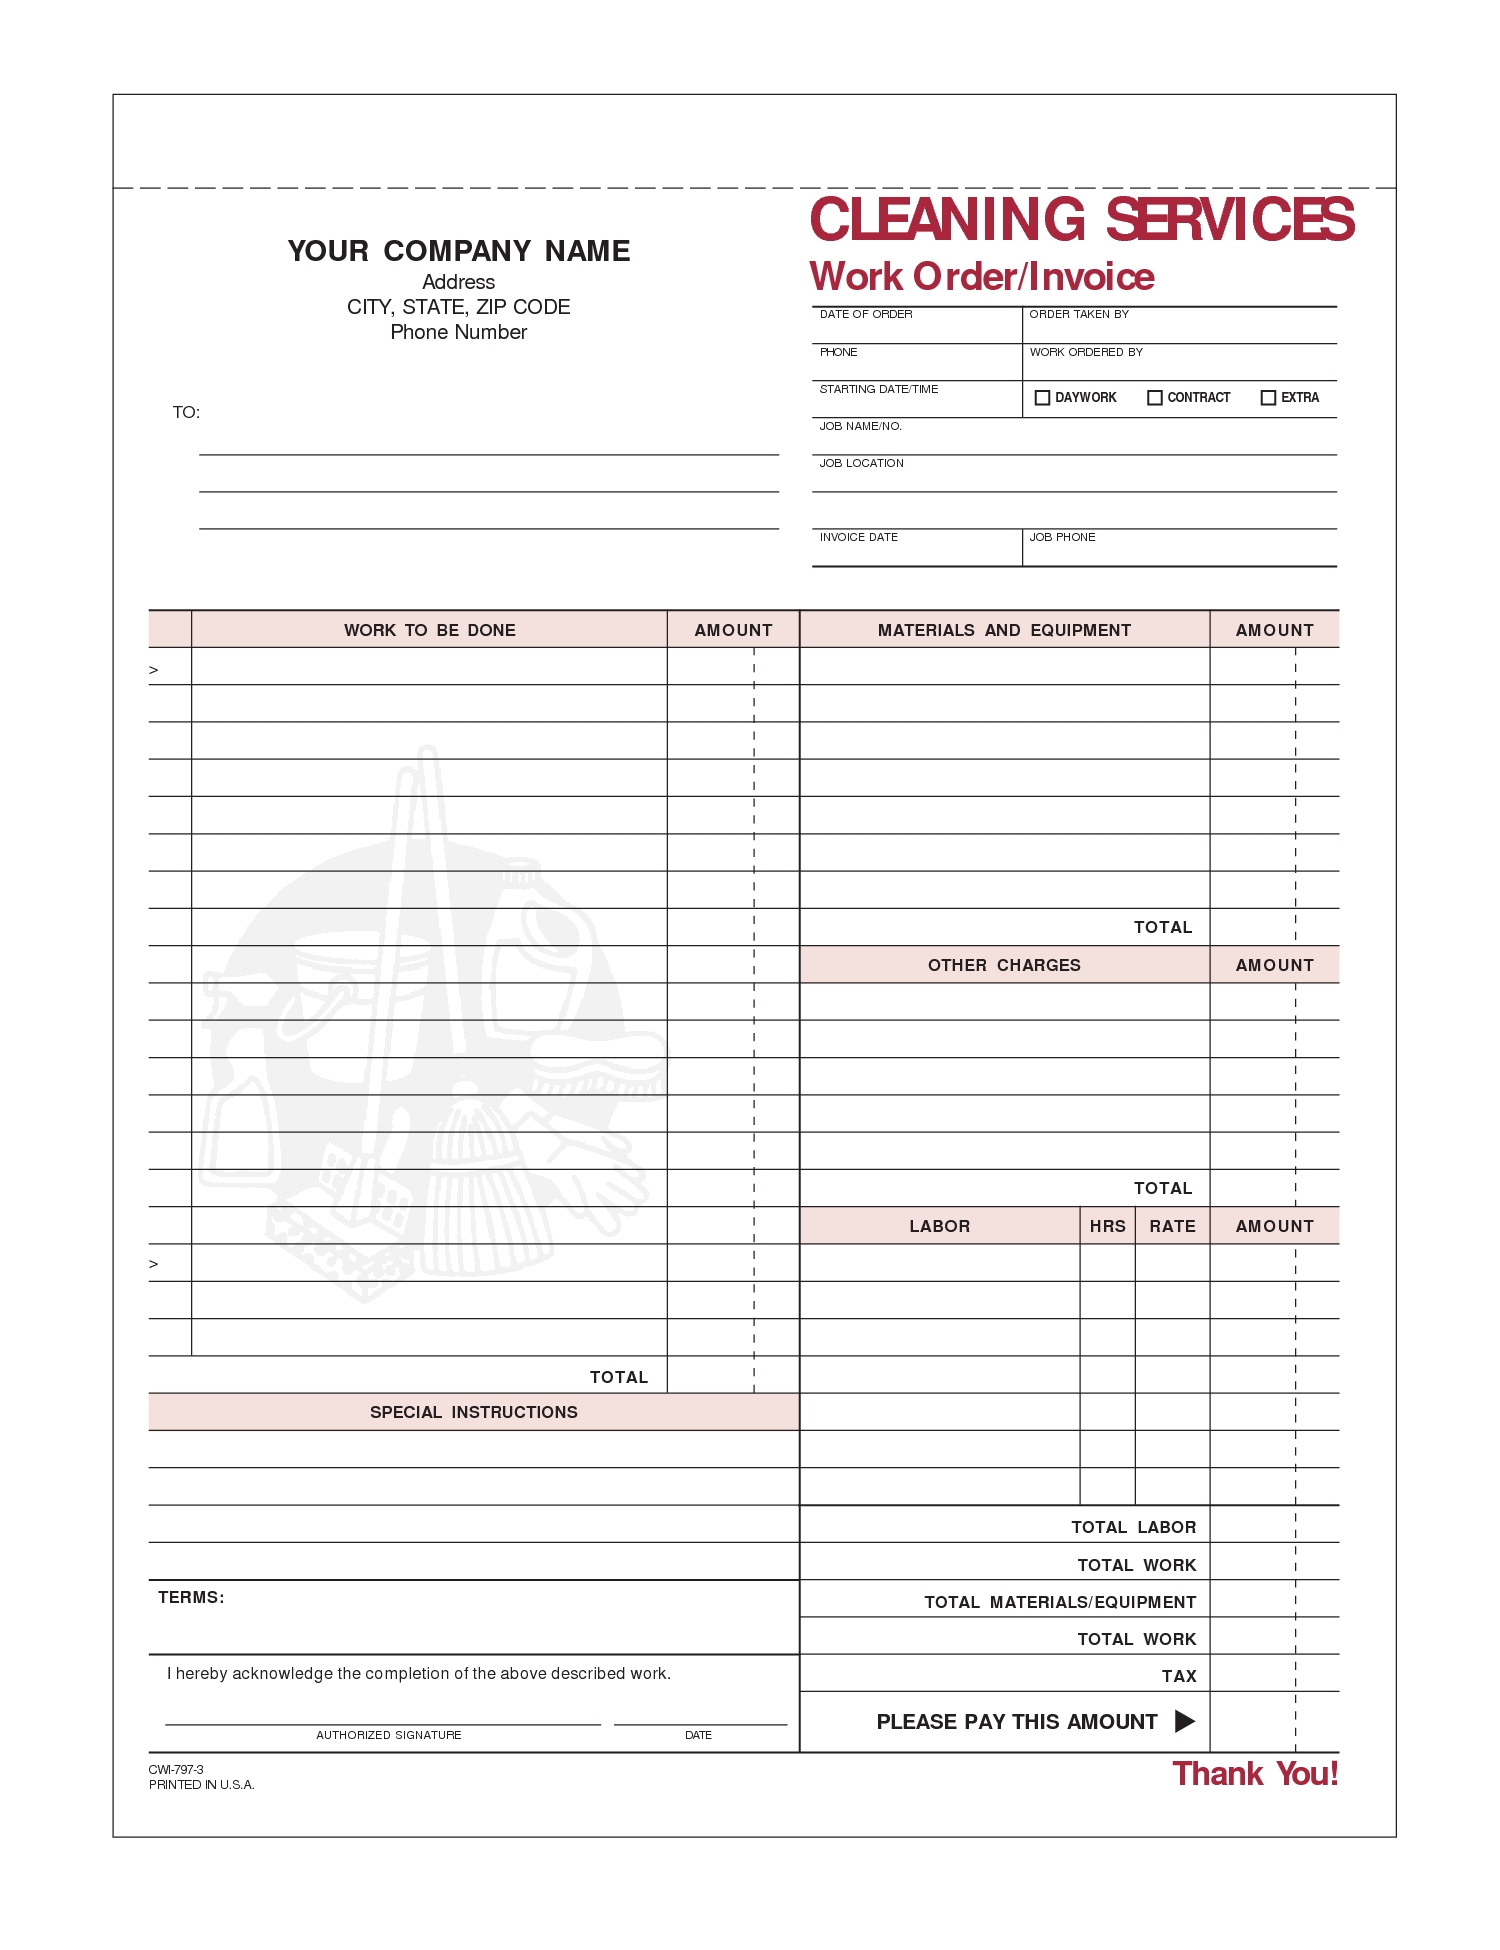 8 best images of printable house cleaning invoice house cleaning house cleaning invoice template